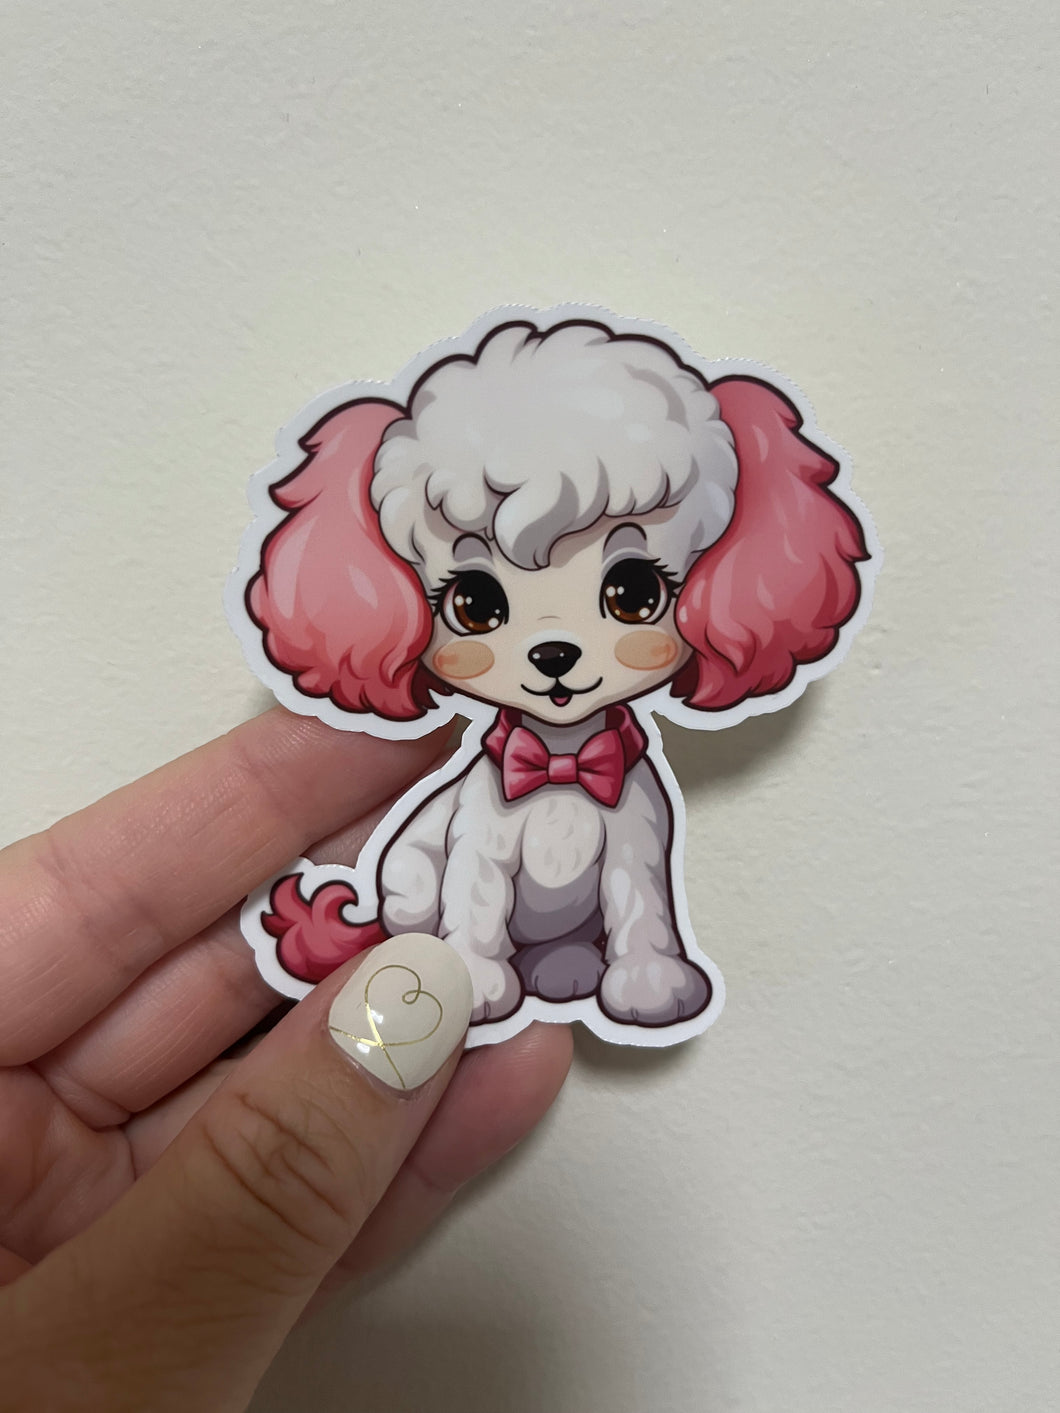 White Poodle with Pink Ears